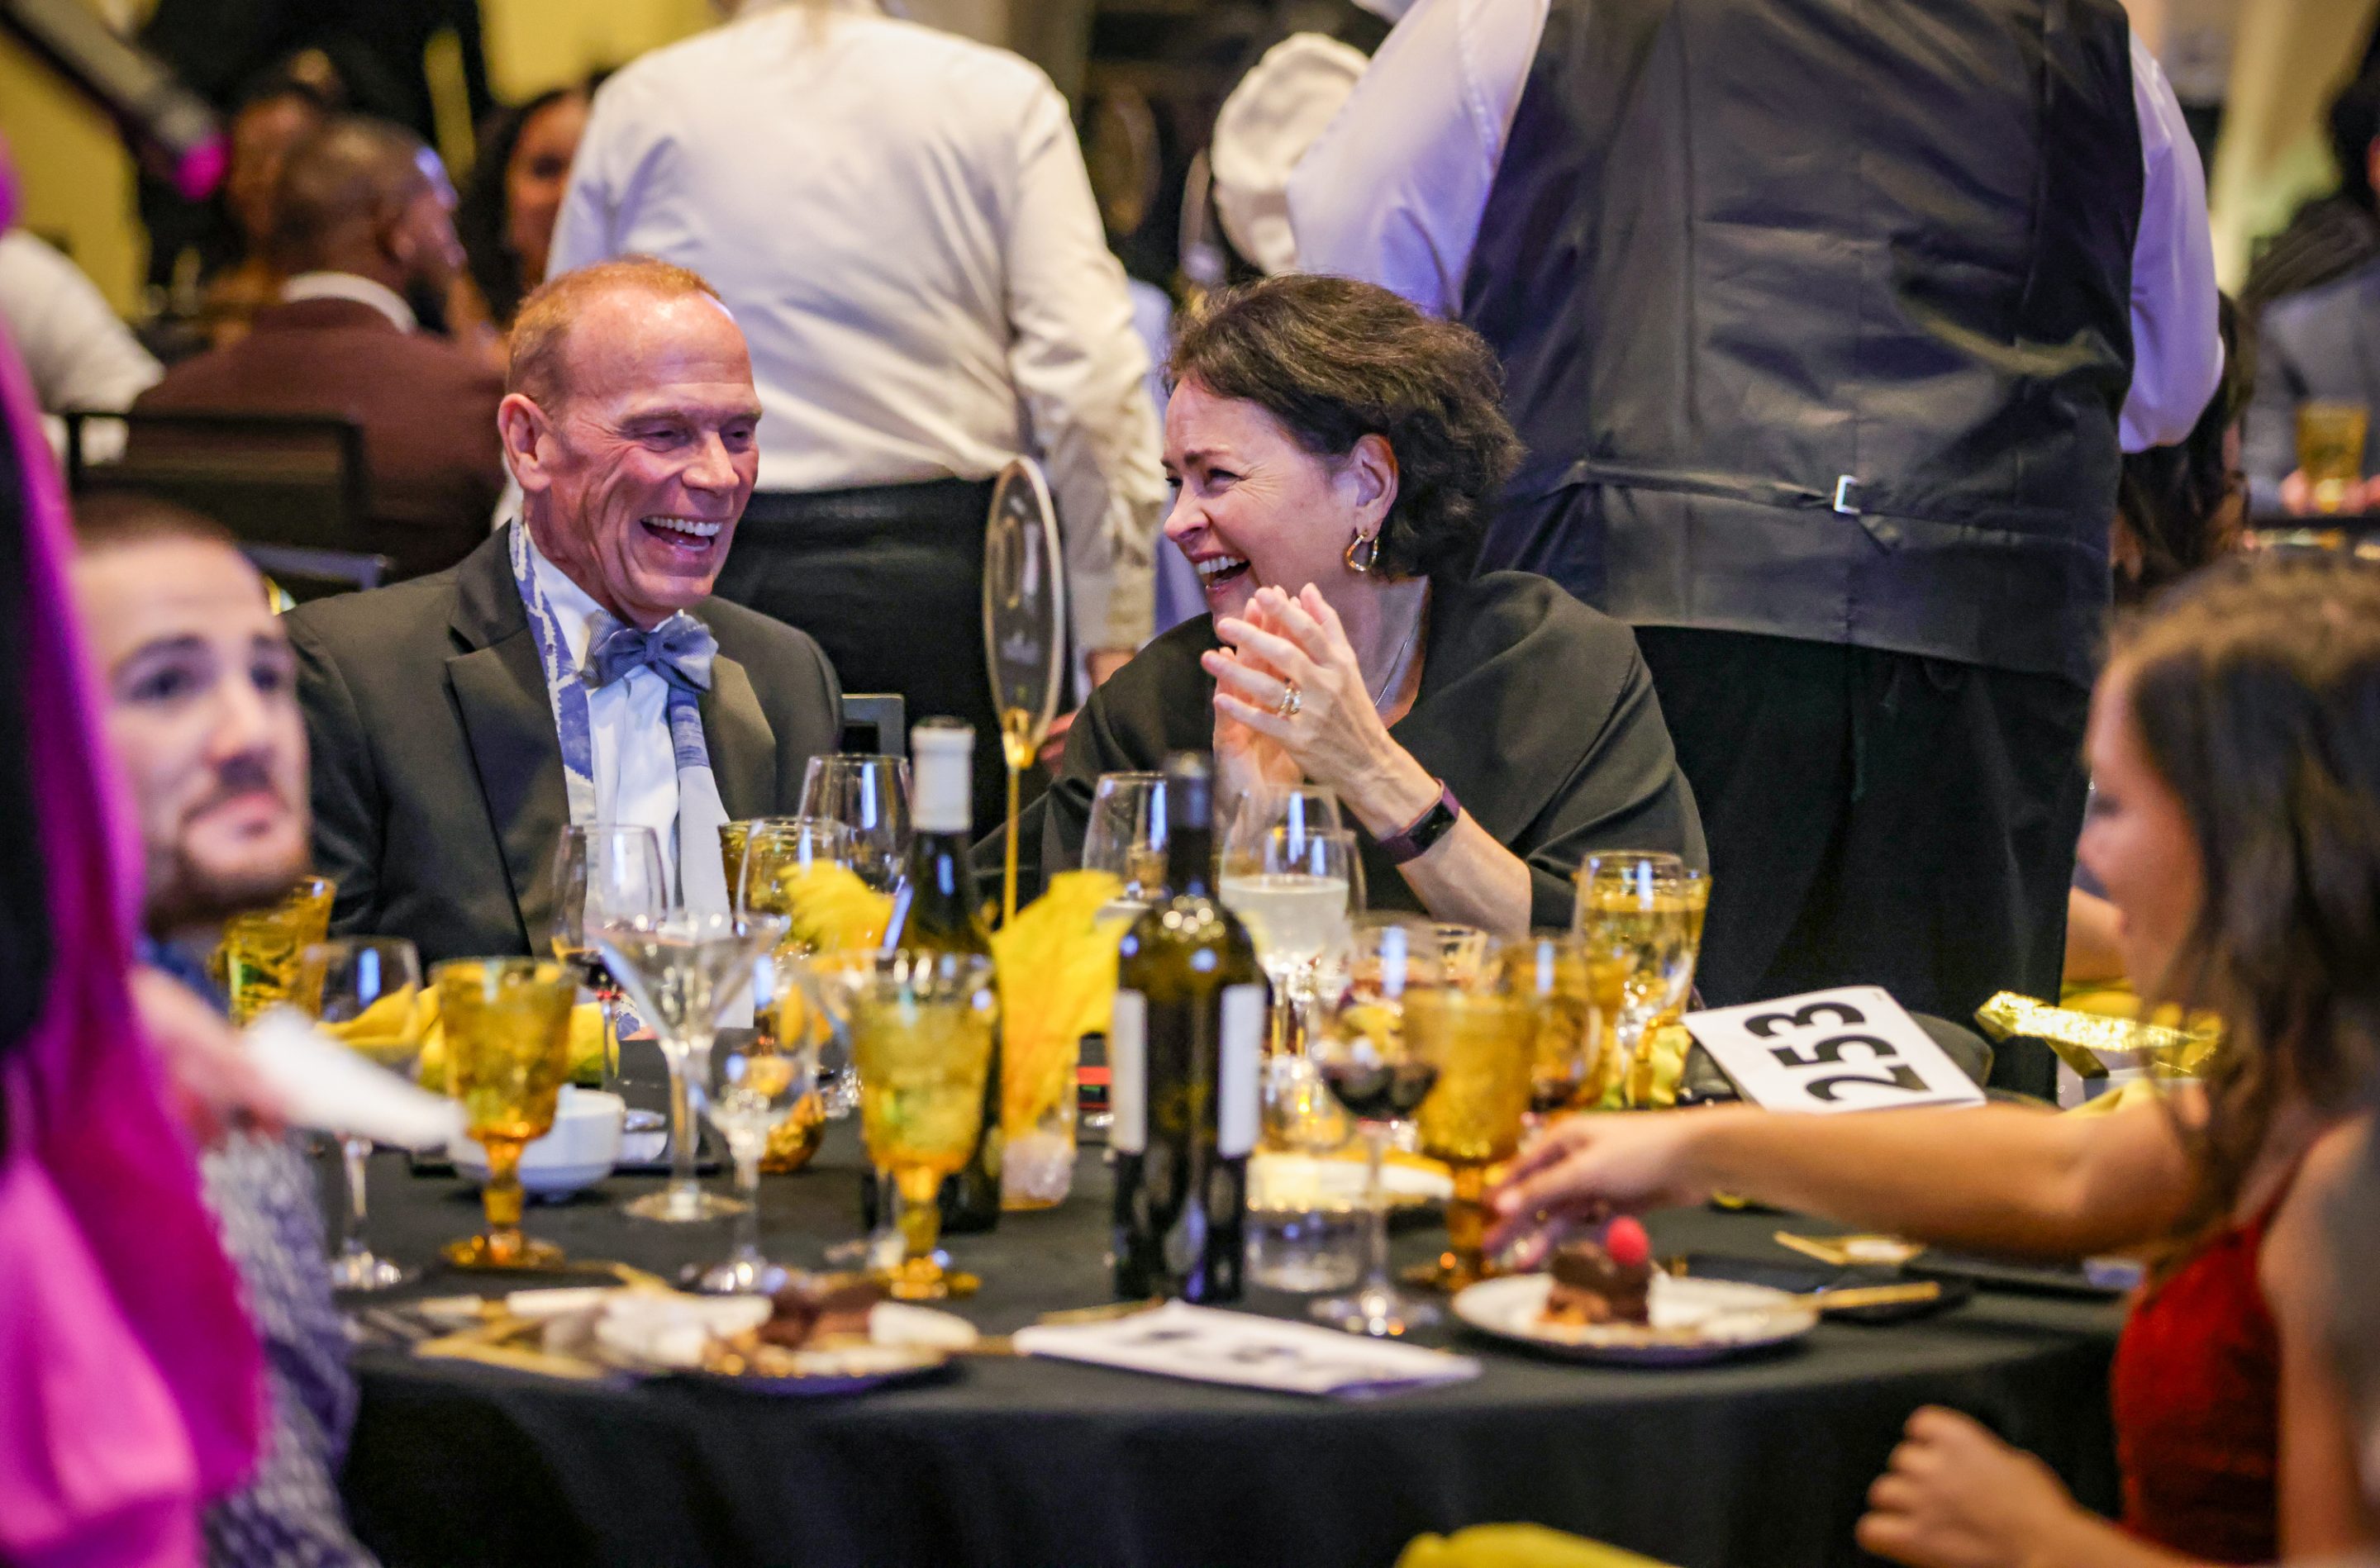 A group of people enjoying dinner together at Sonoma County Non-Profit Organization event and laughing.